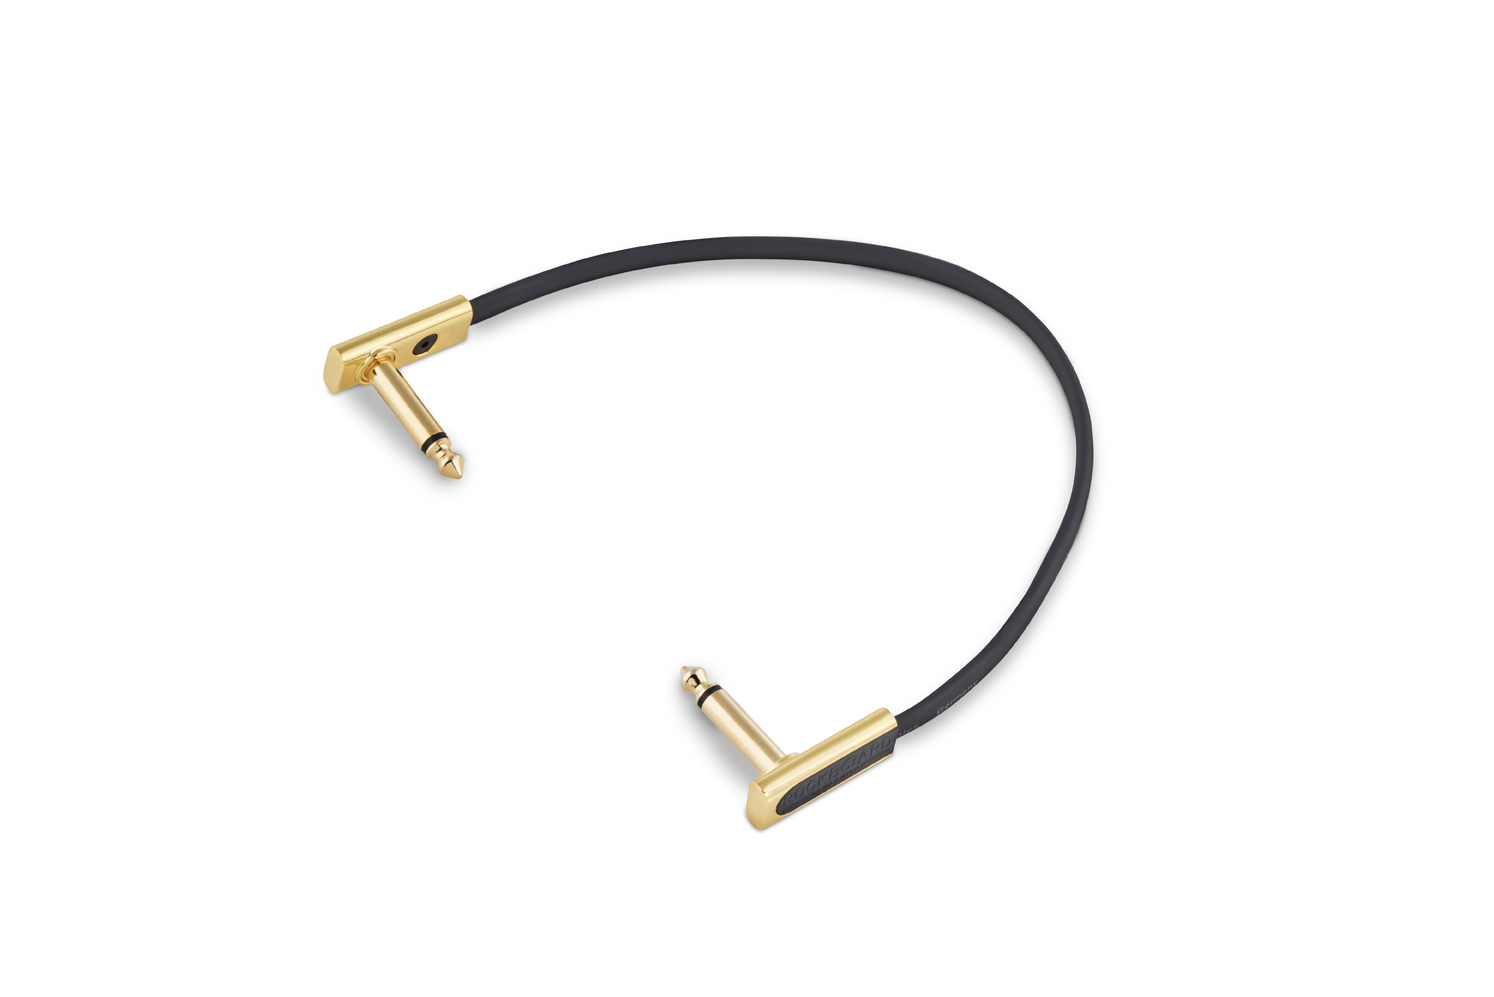 RockBoard Gold Series Flat Patch Cable - 20 cm / 7 7/8"